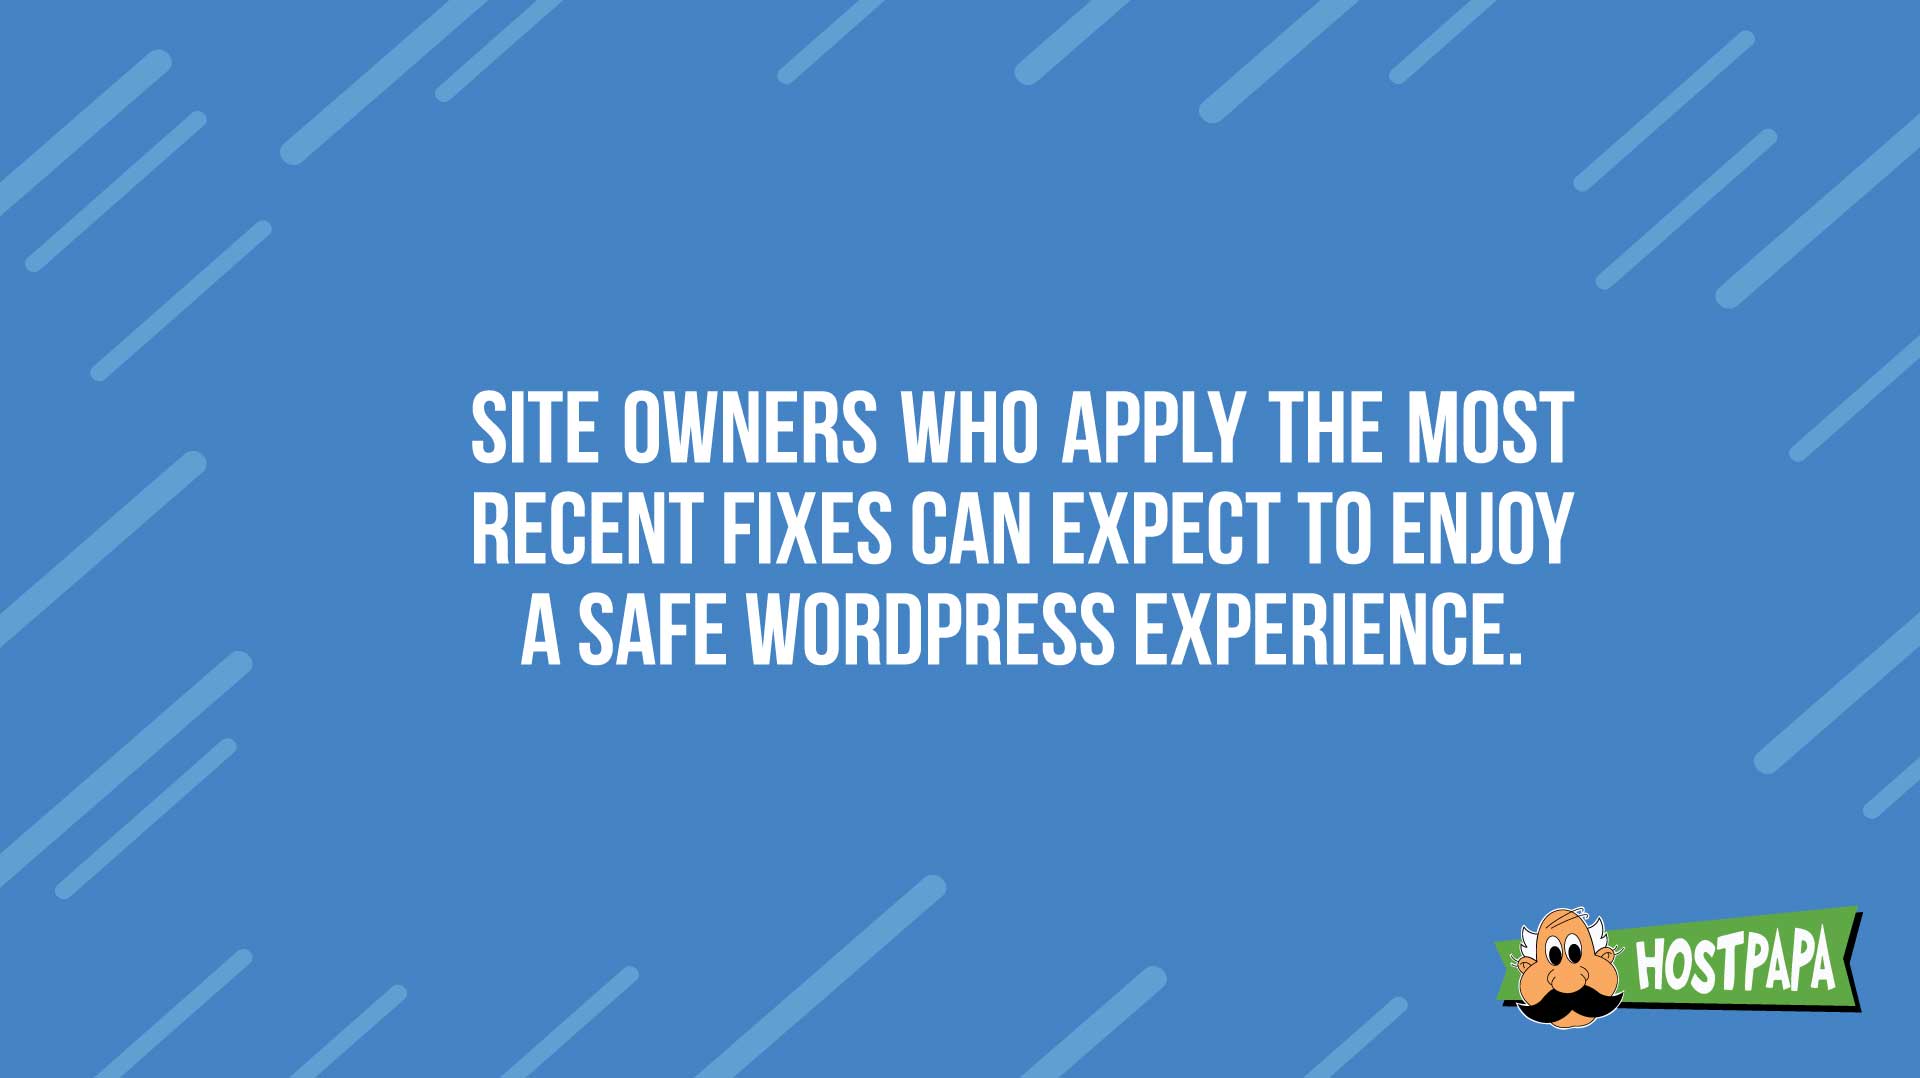 Site owners who use the most recent fixes enjoy a safe WordPress experience